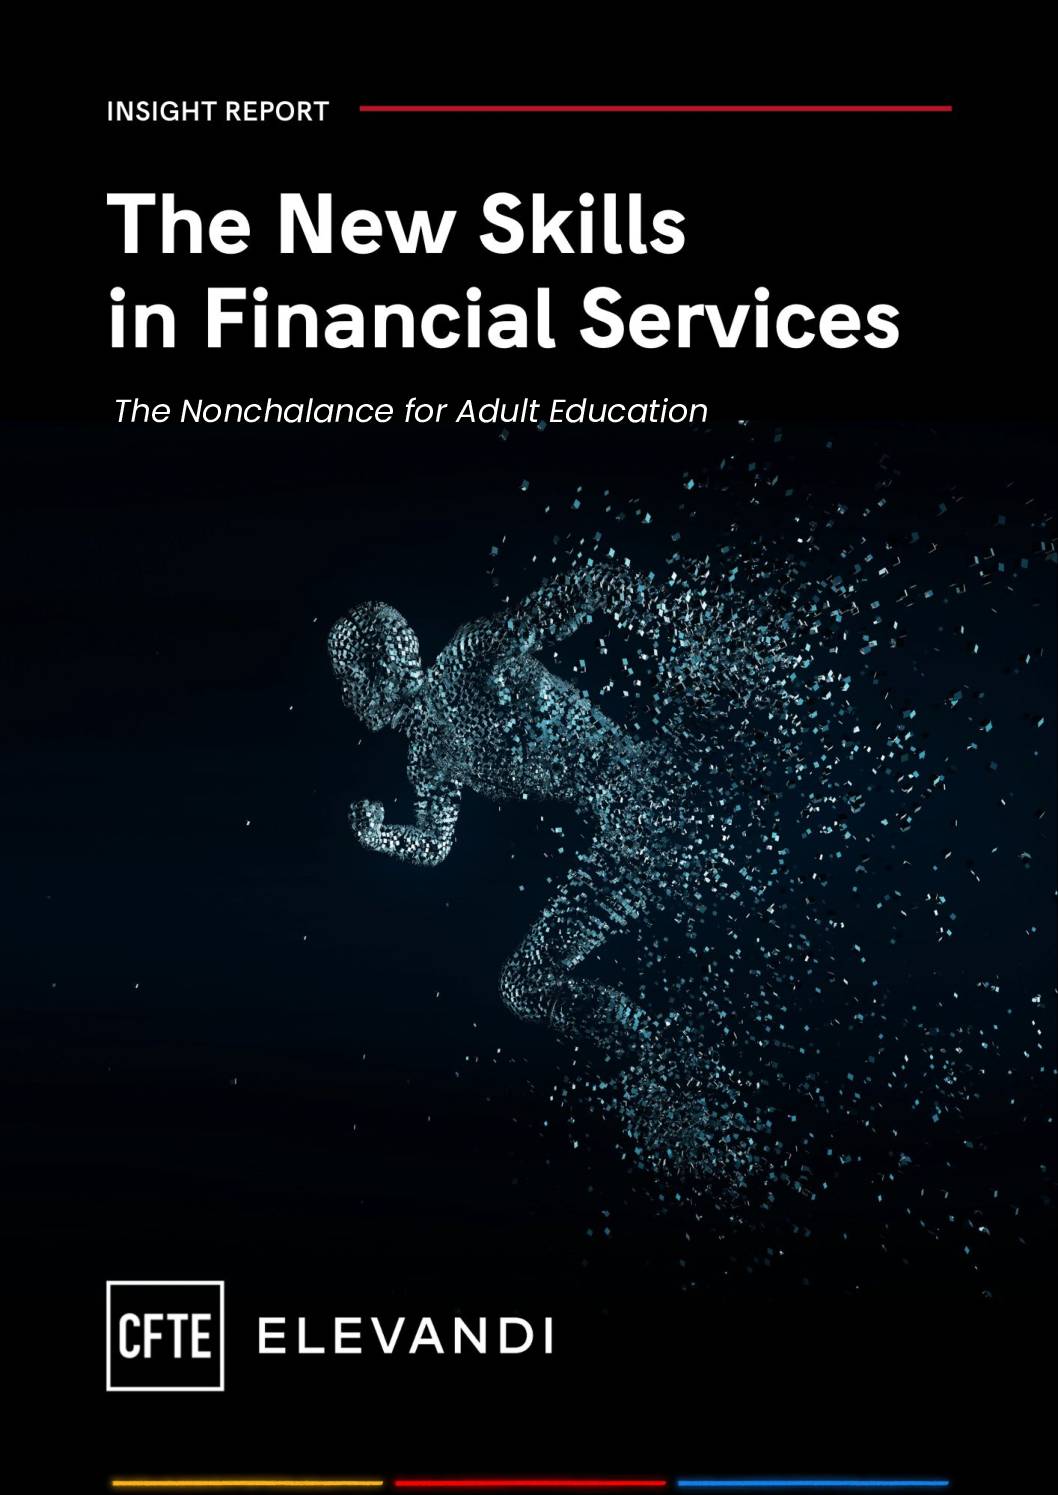 New-Skills-in-Financial-Services_CFTE_Final-pdf